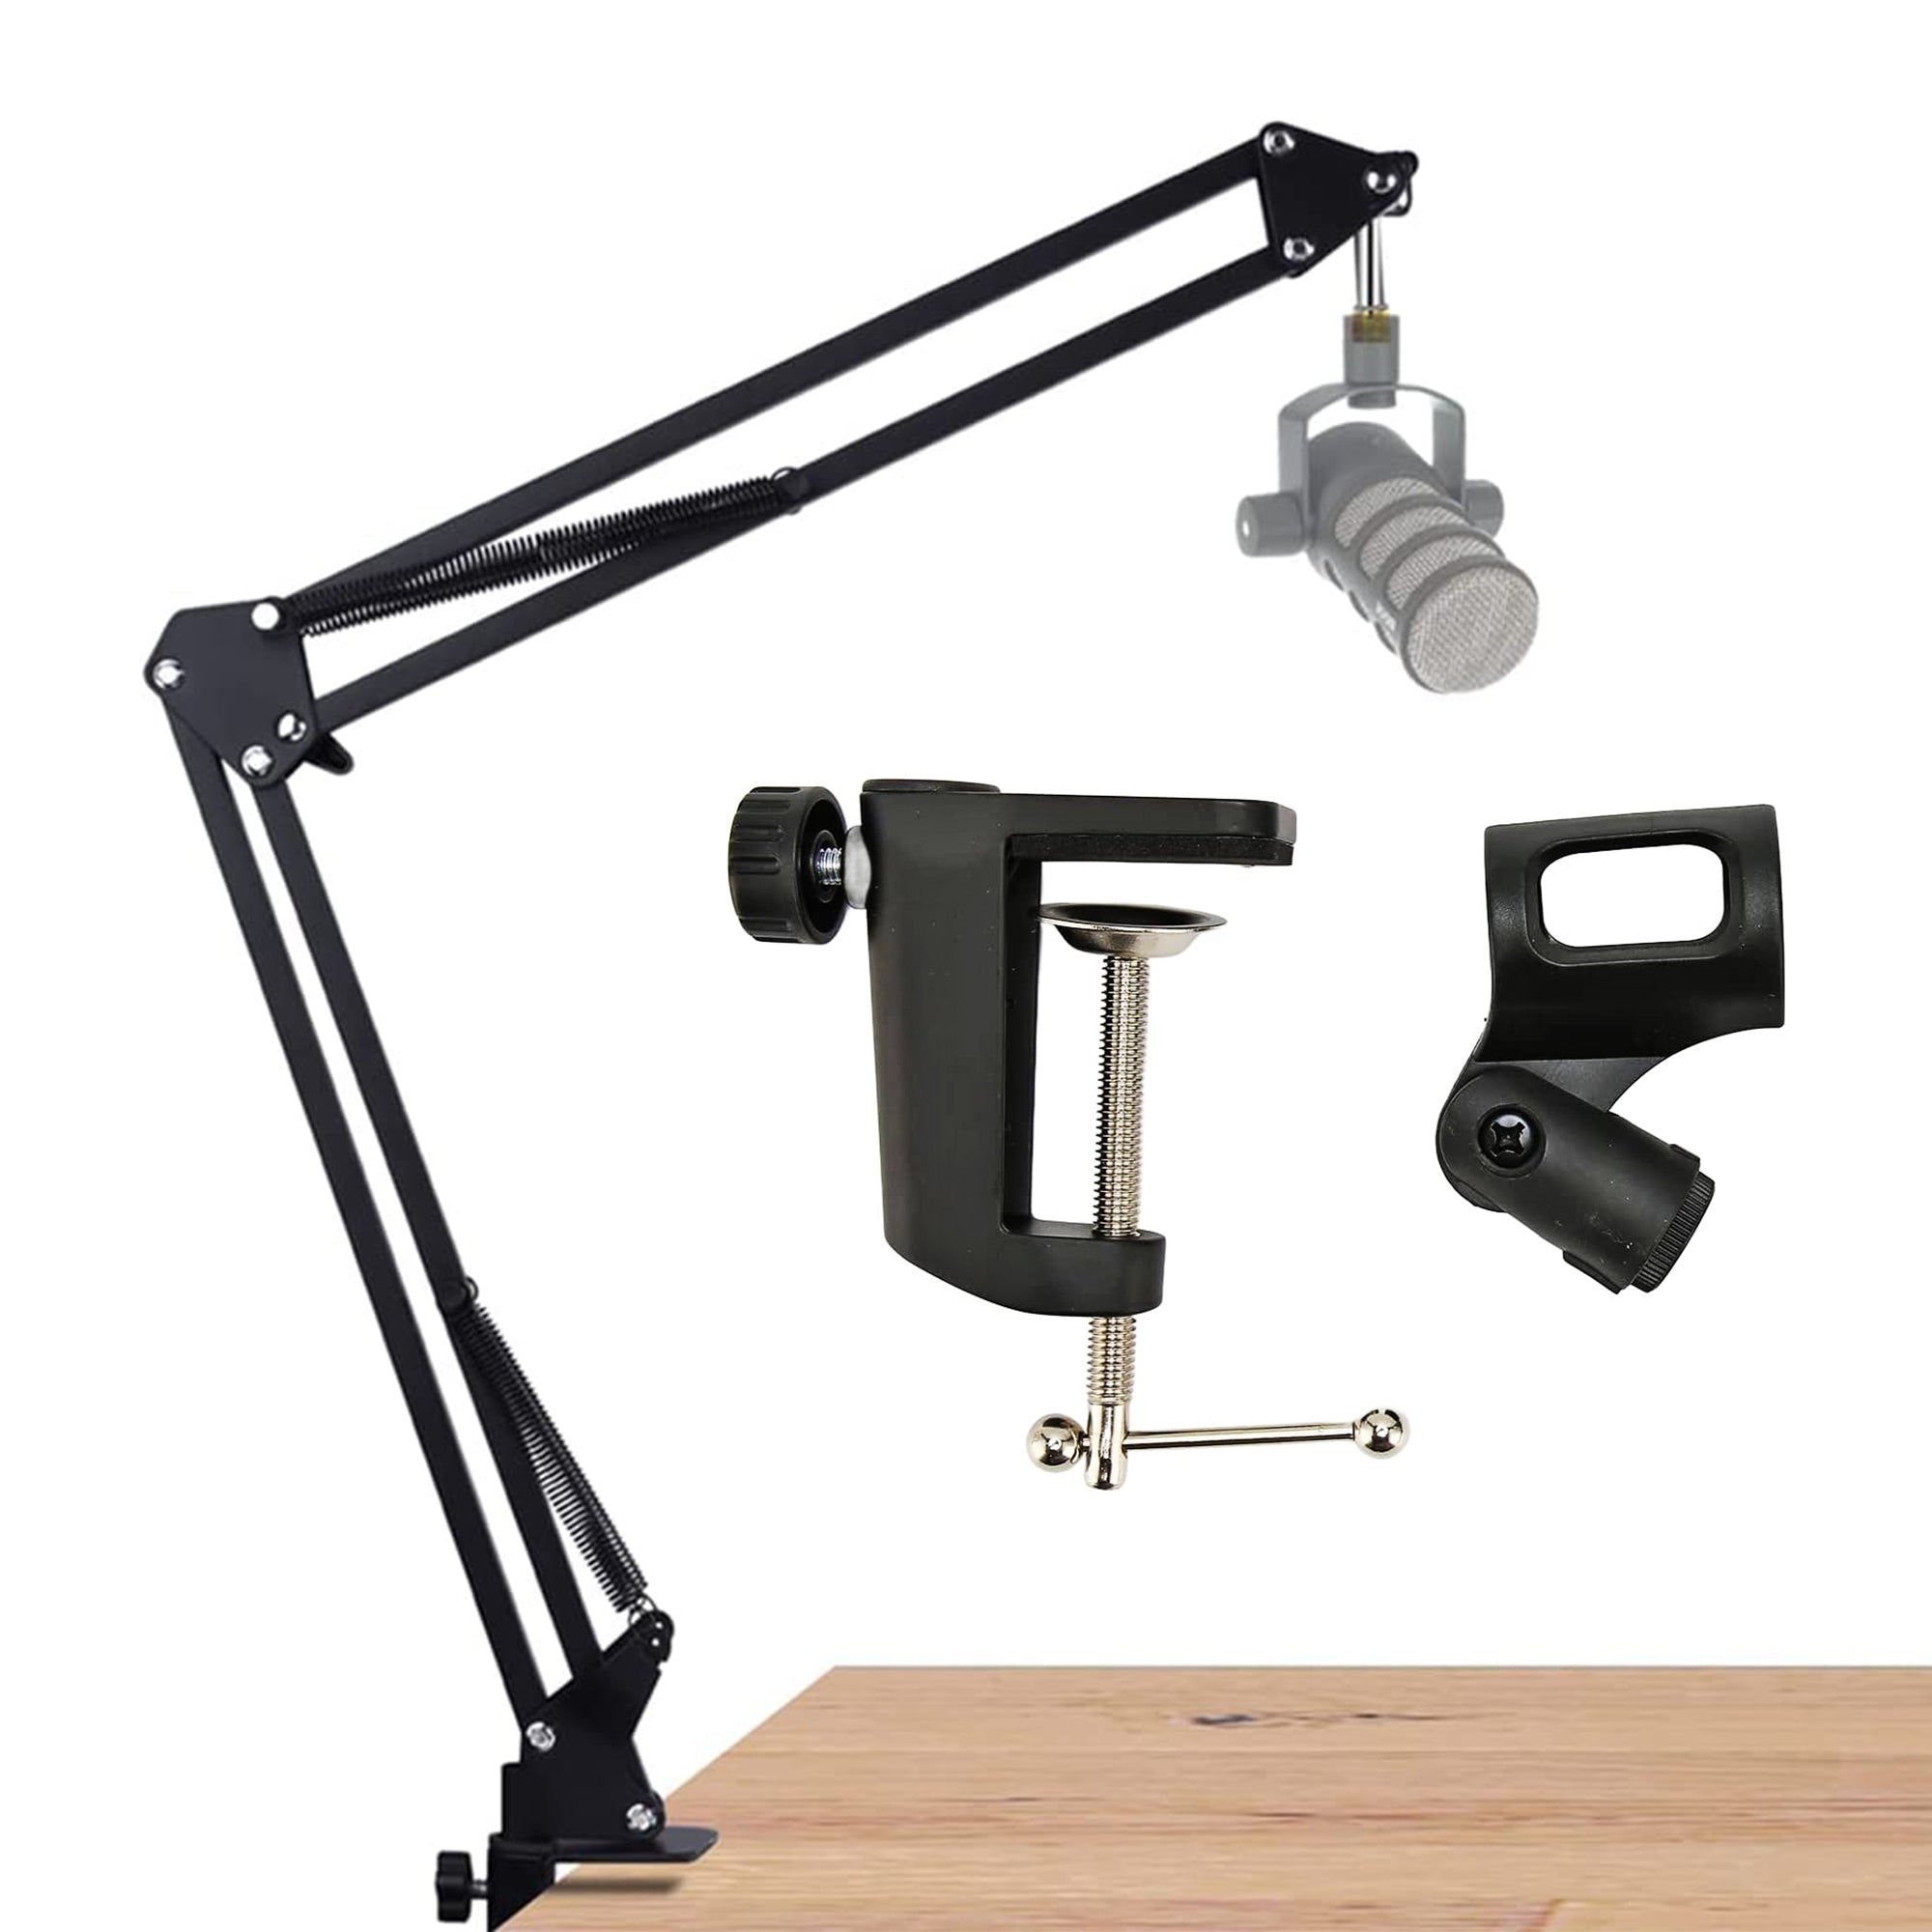 5 Core Microphone Arm Desk Mic Holder Stand Black Adjustable Microphone Arm Desk Mount 360° Rotatable And Foldable Scissor Mounting -MS ARM BLK